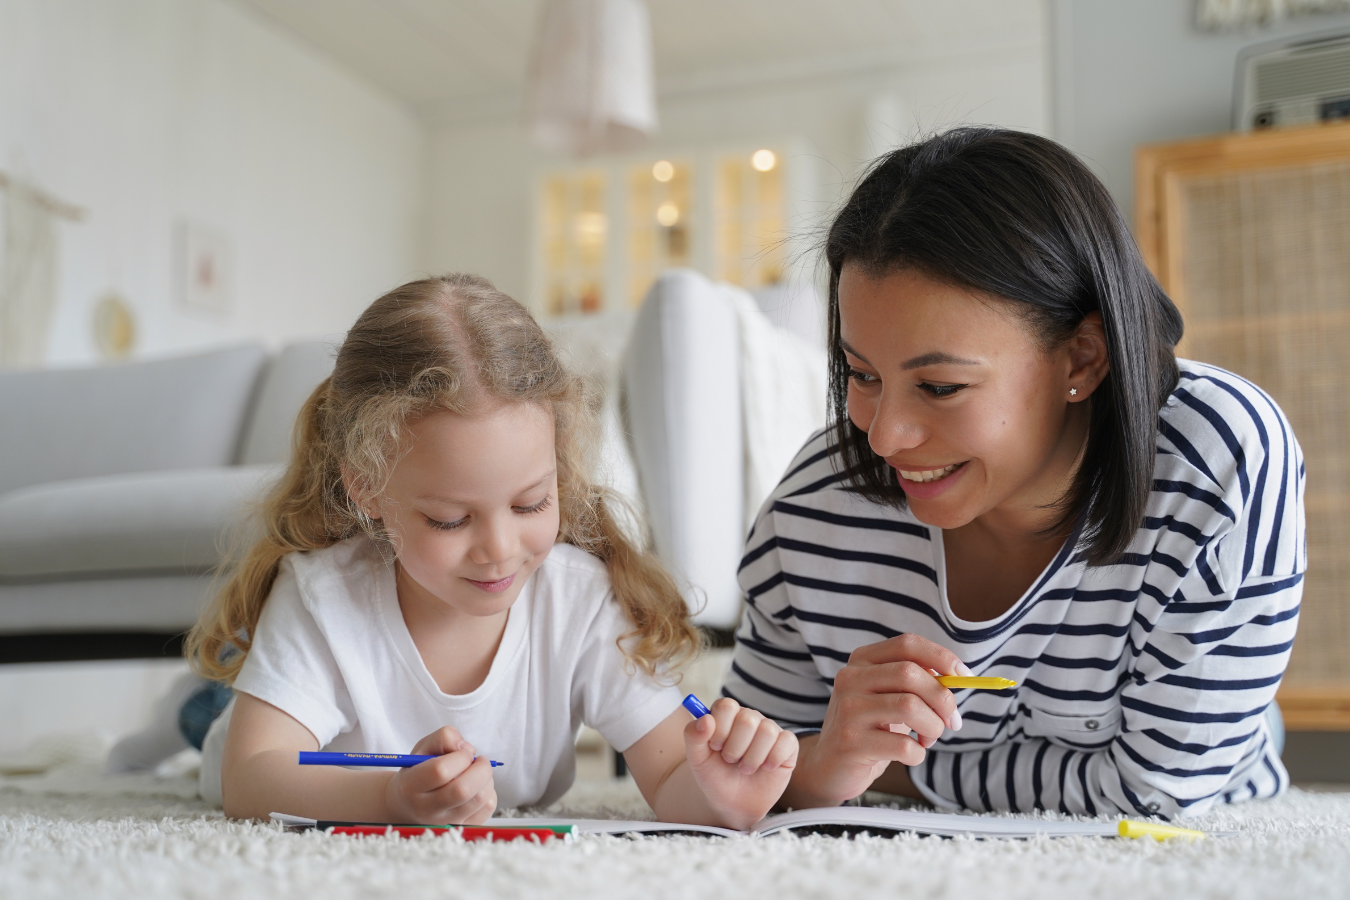 A foster care Mother helps her young foster care daughter colour. The two are smiling and happy. Sparkrock's ERP tool is an invaluable resource for social services providers.